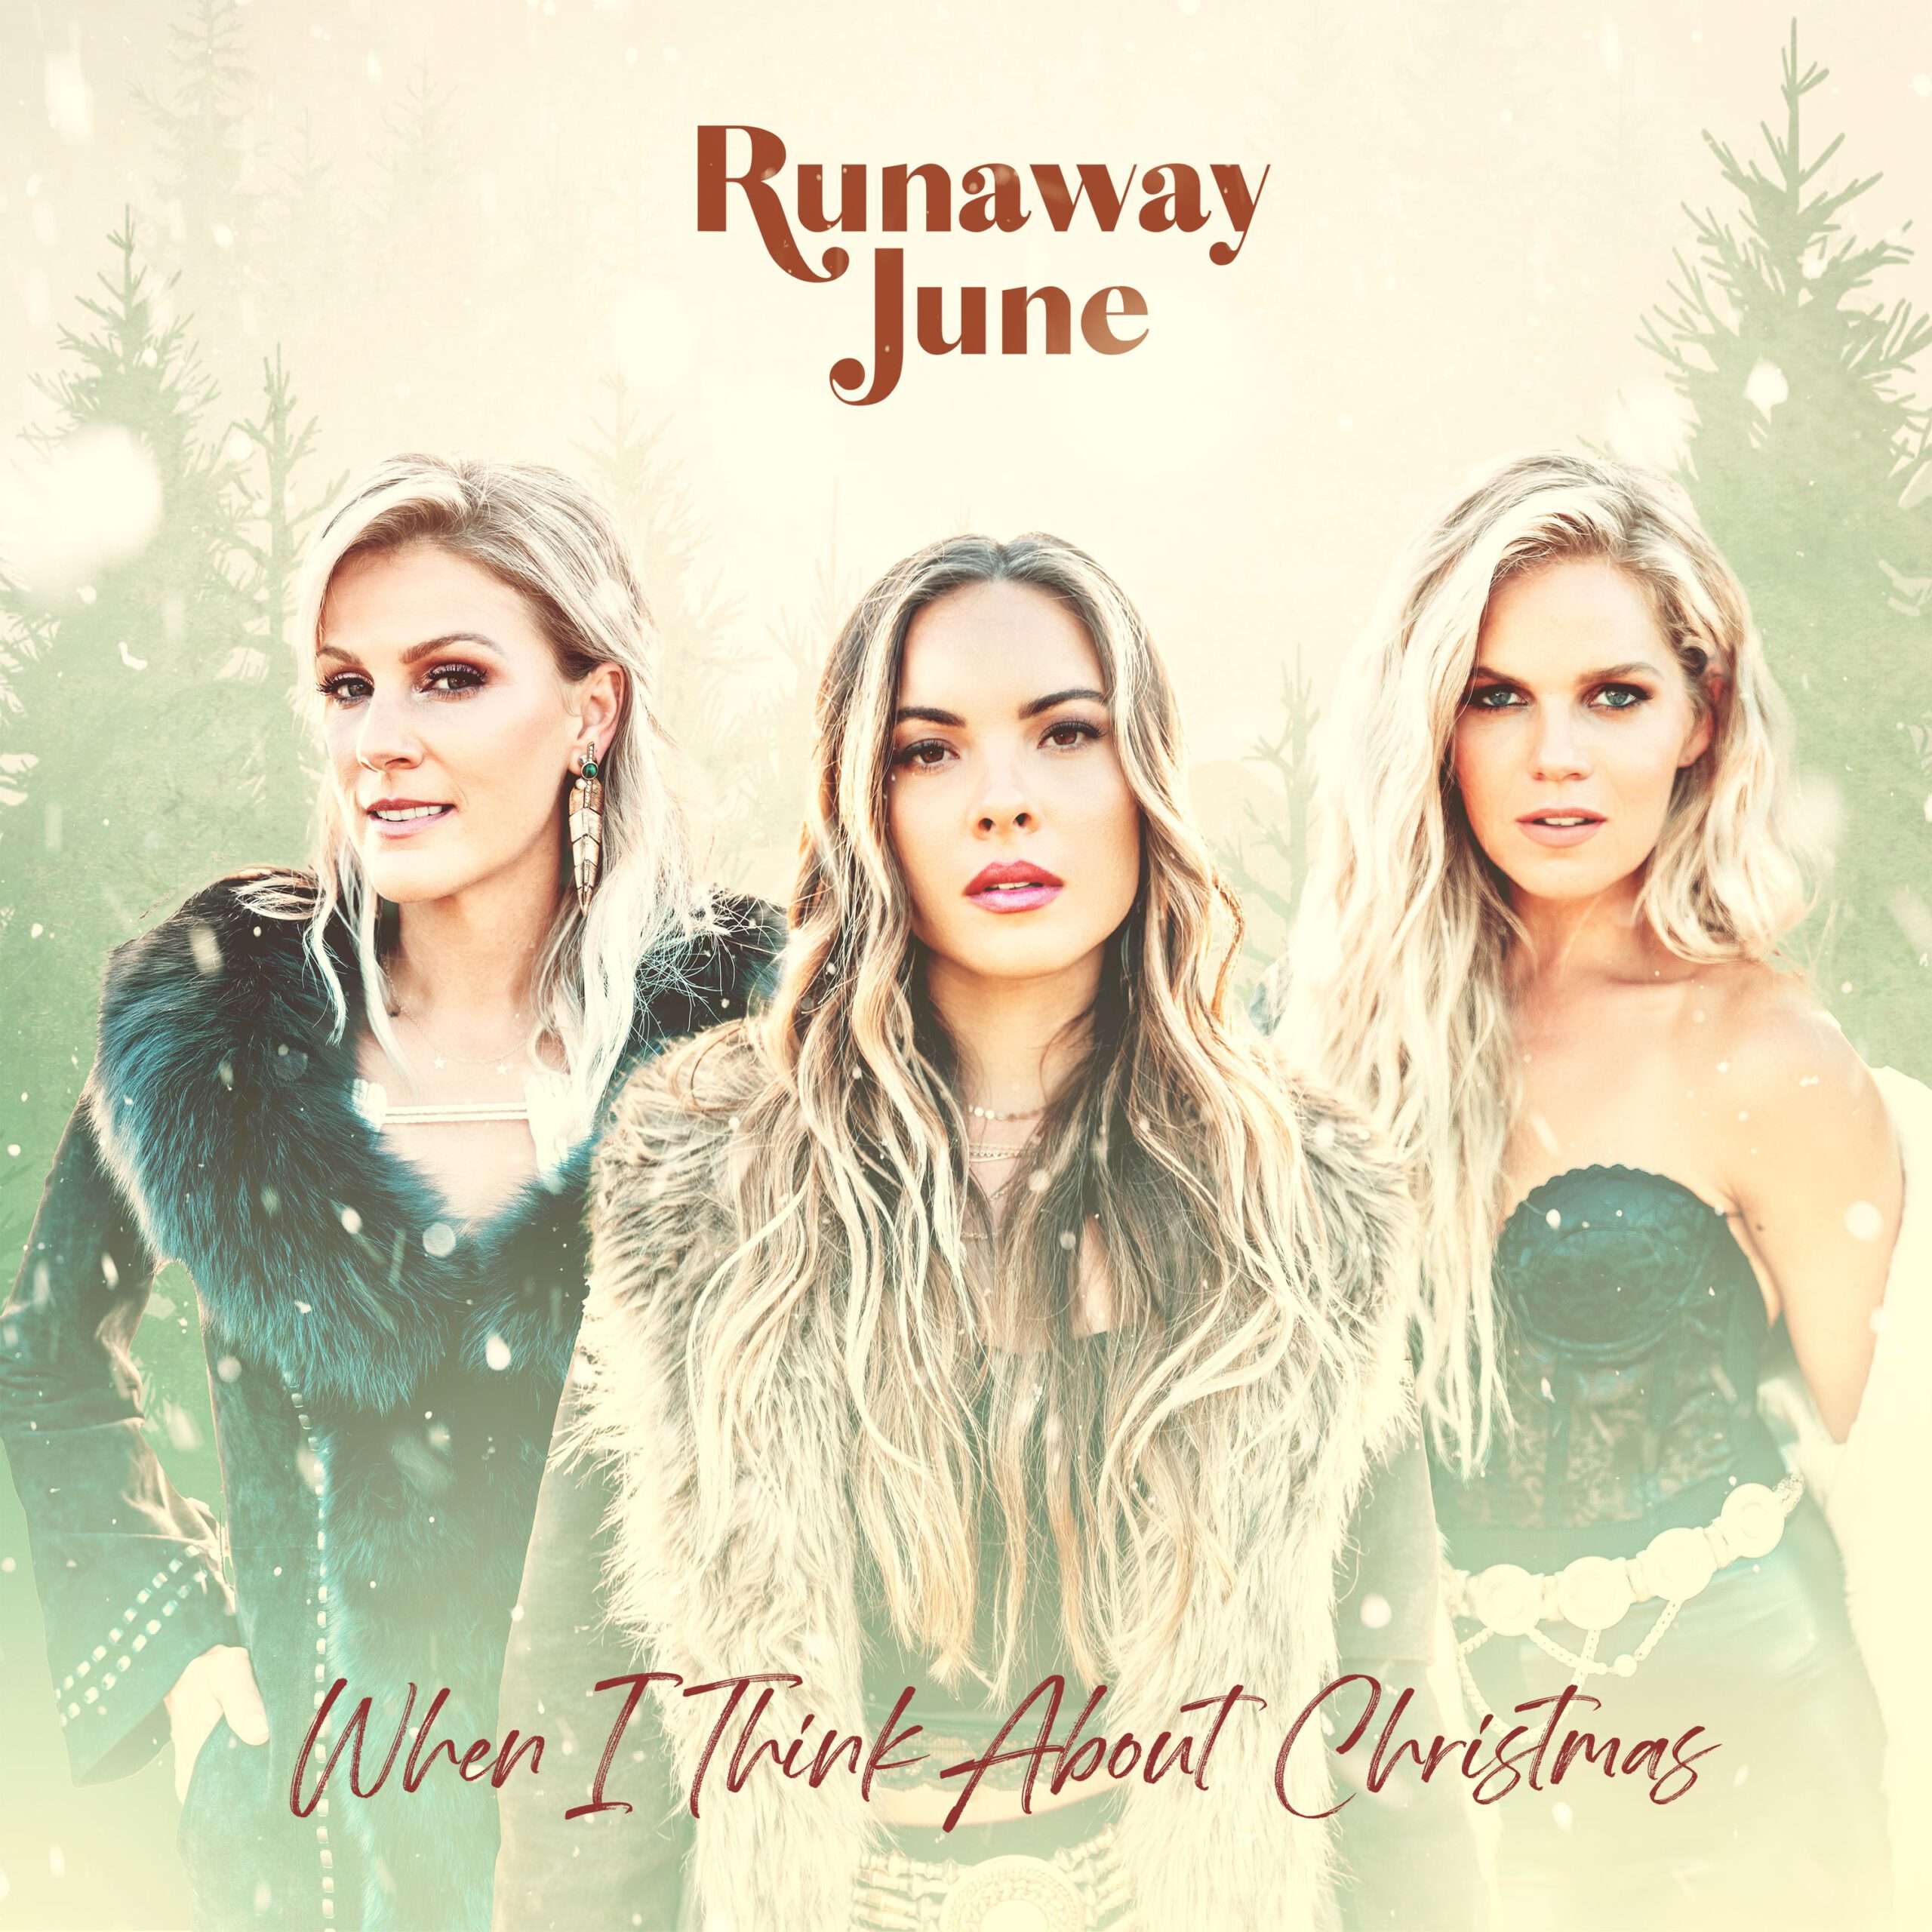 Runaway June „When I Think About Christmas“ EP